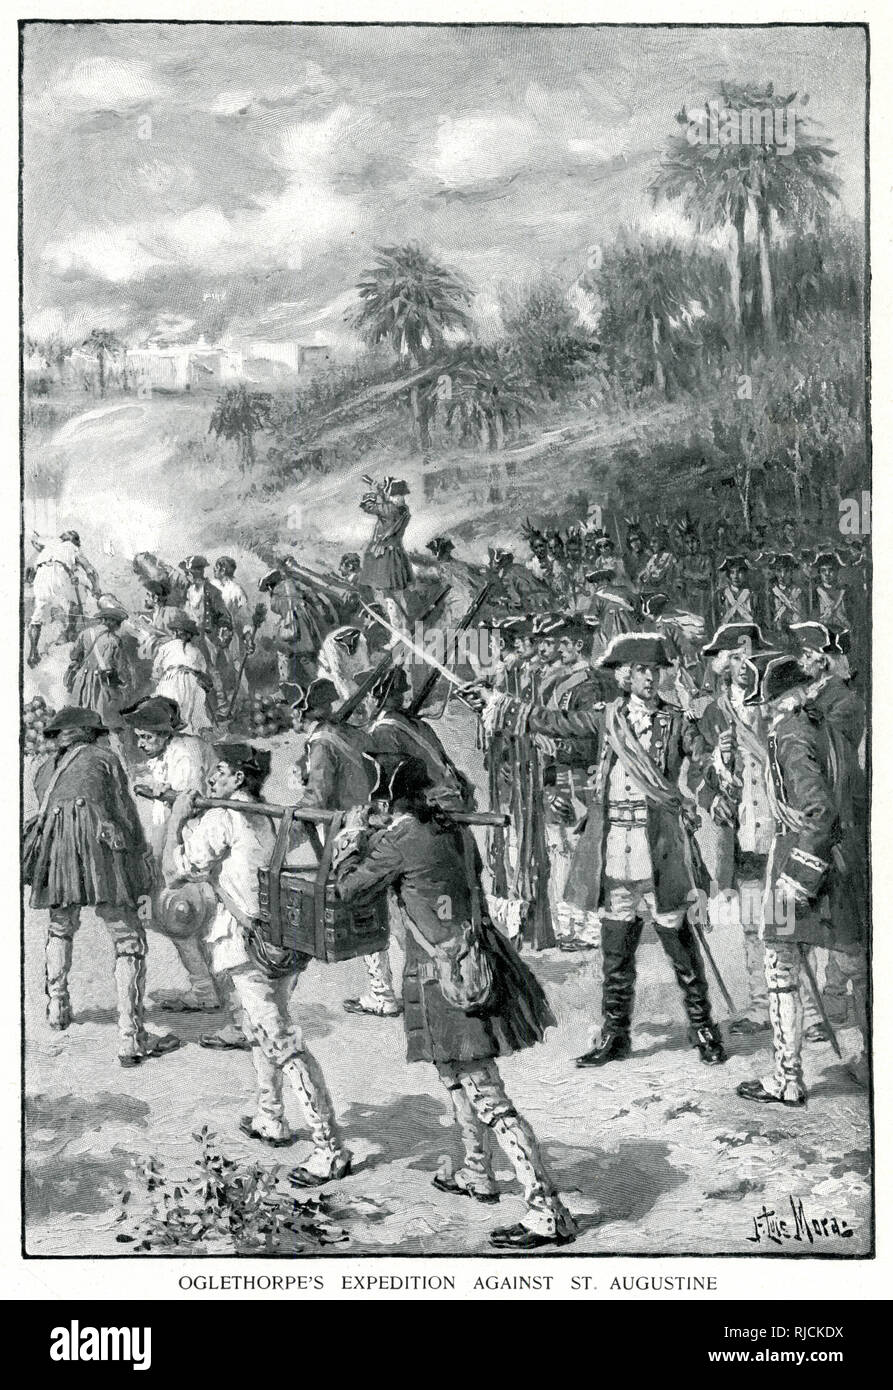 Part of the War of Jenkin's Ear between Great Britain and Spain, James Oglethorpe led a band of English soldiers, militia, and Chickasaw and Creek Nation soldiers. After capturing several Spanish forts, Oglethorpe attacked St. Augustine in a 27 day bombardment with British ships blockading the port. However the Spanish were able to get supplies through the blockade and Oglethorpe was forced to withdraw on land due to hurricane season. Stock Photo